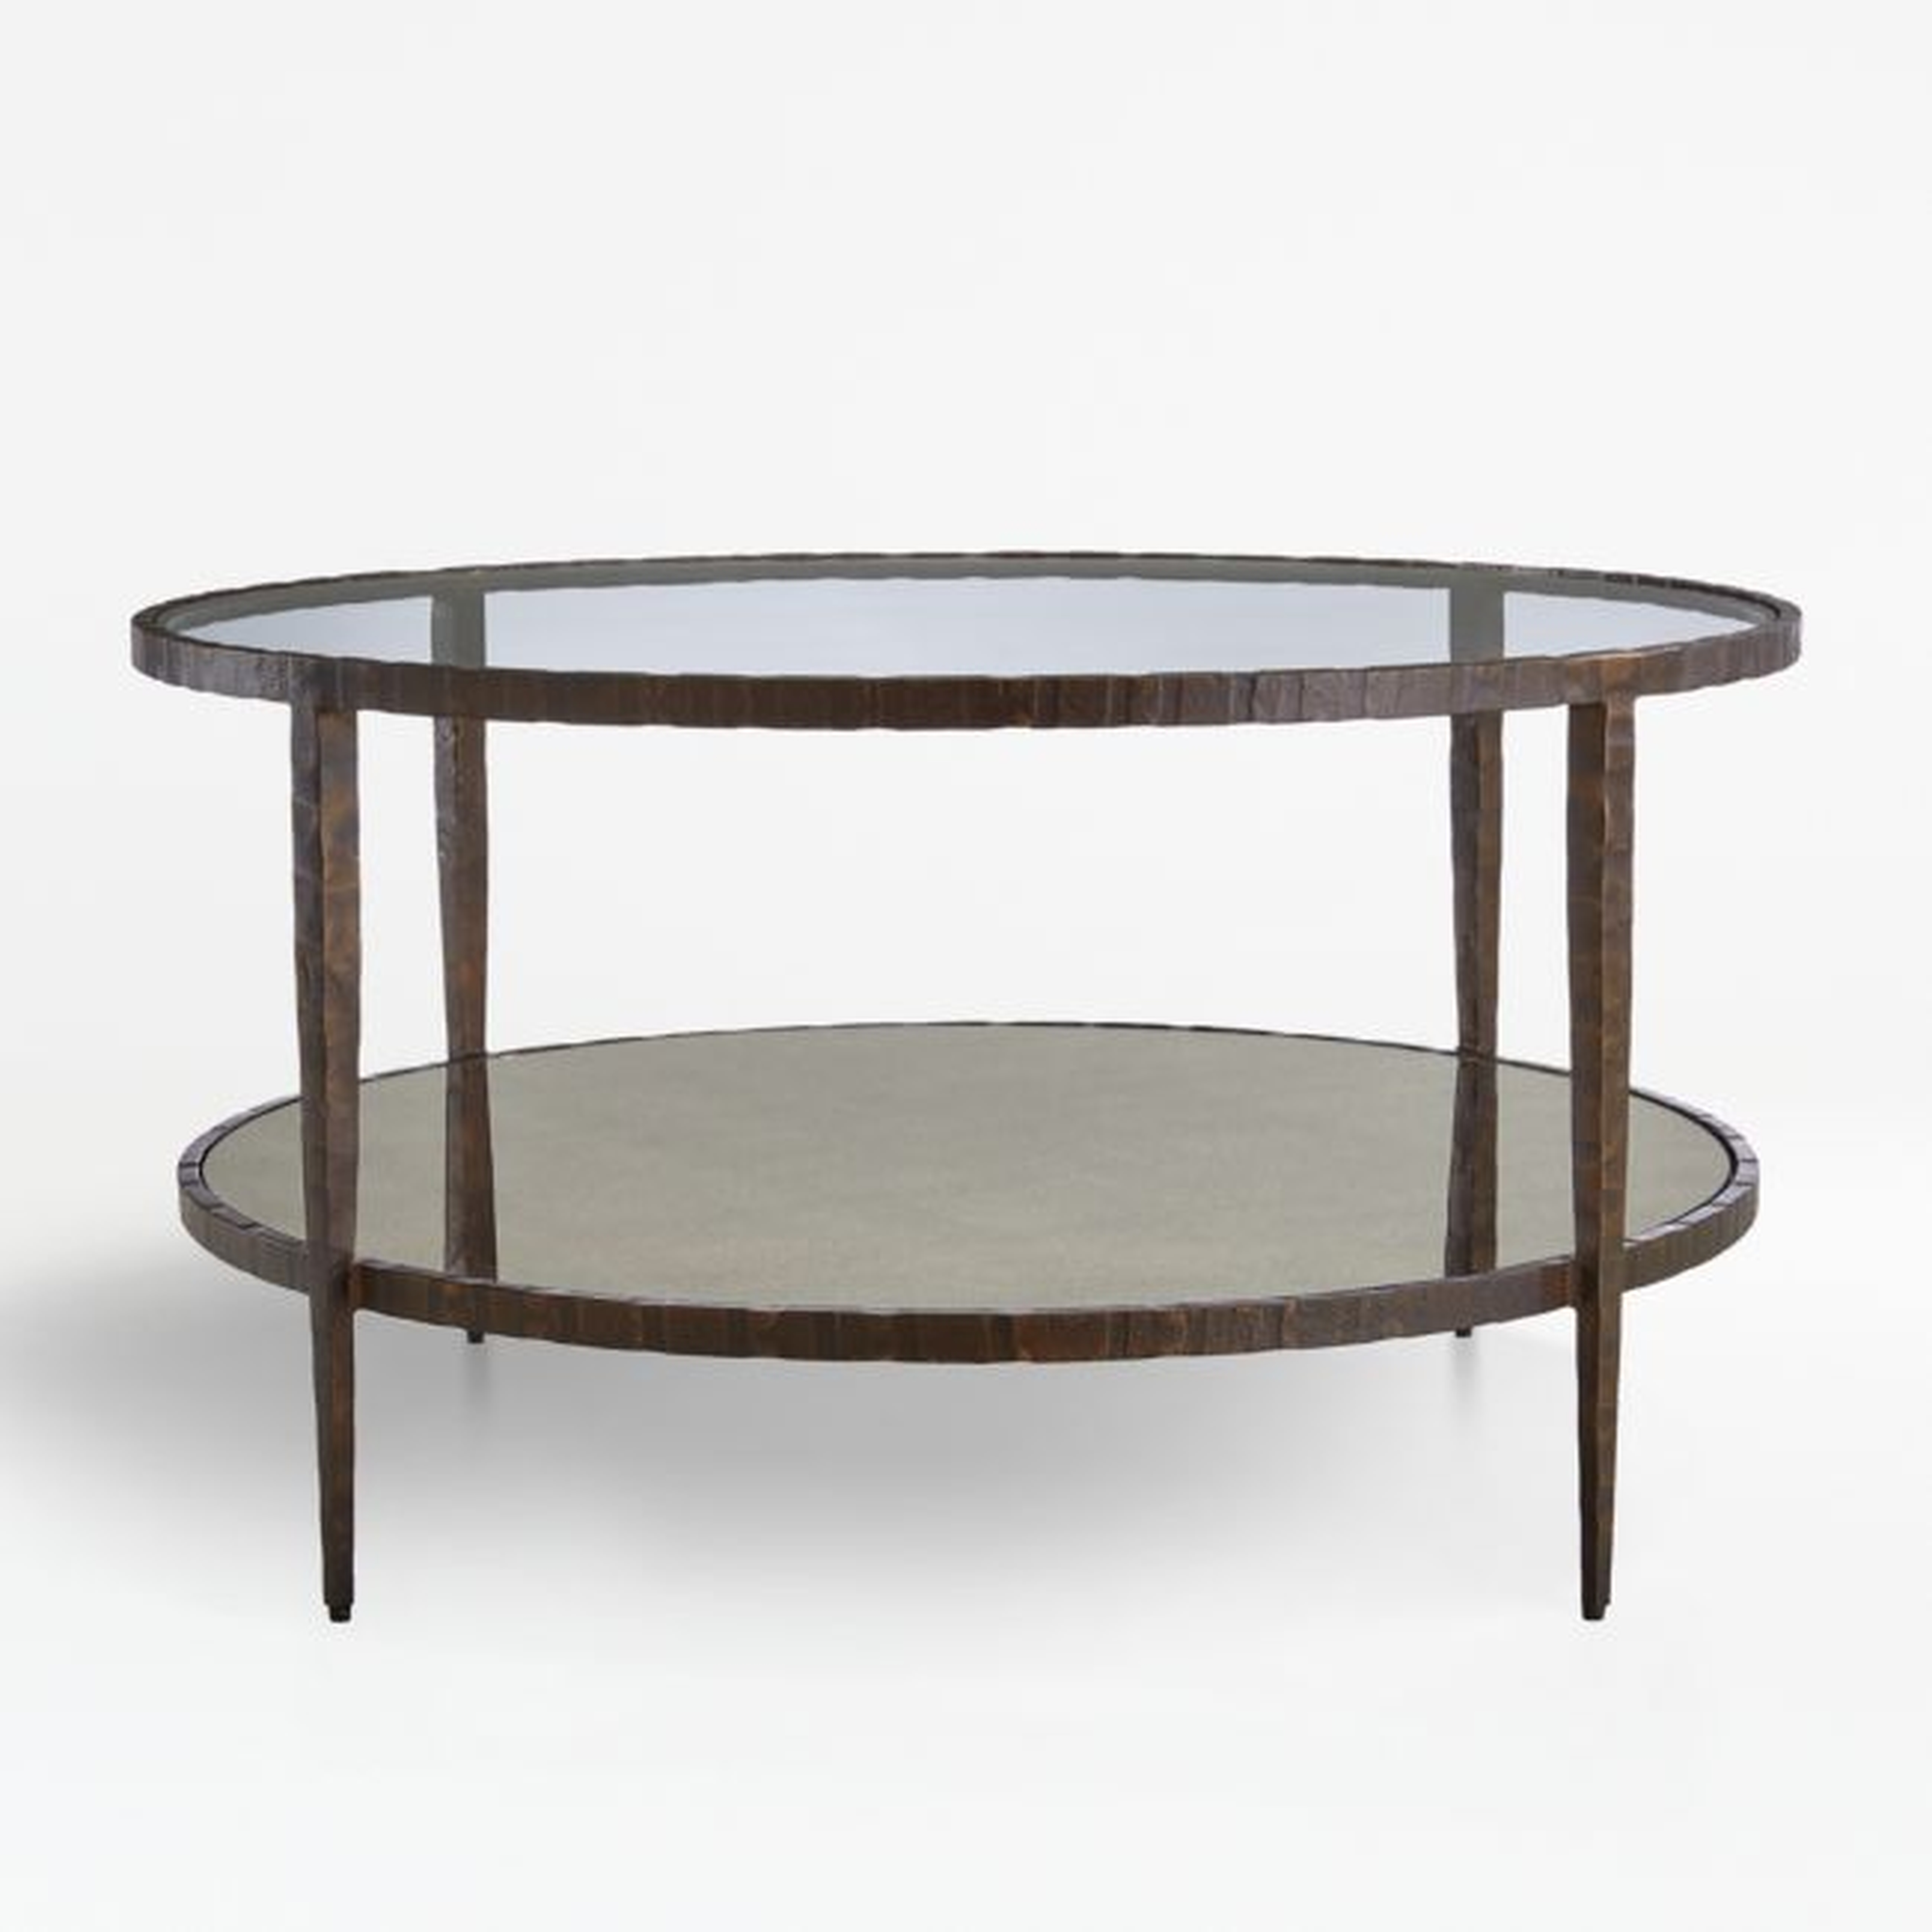 Clairemont Round Art Deco Coffee Table - Crate and Barrel